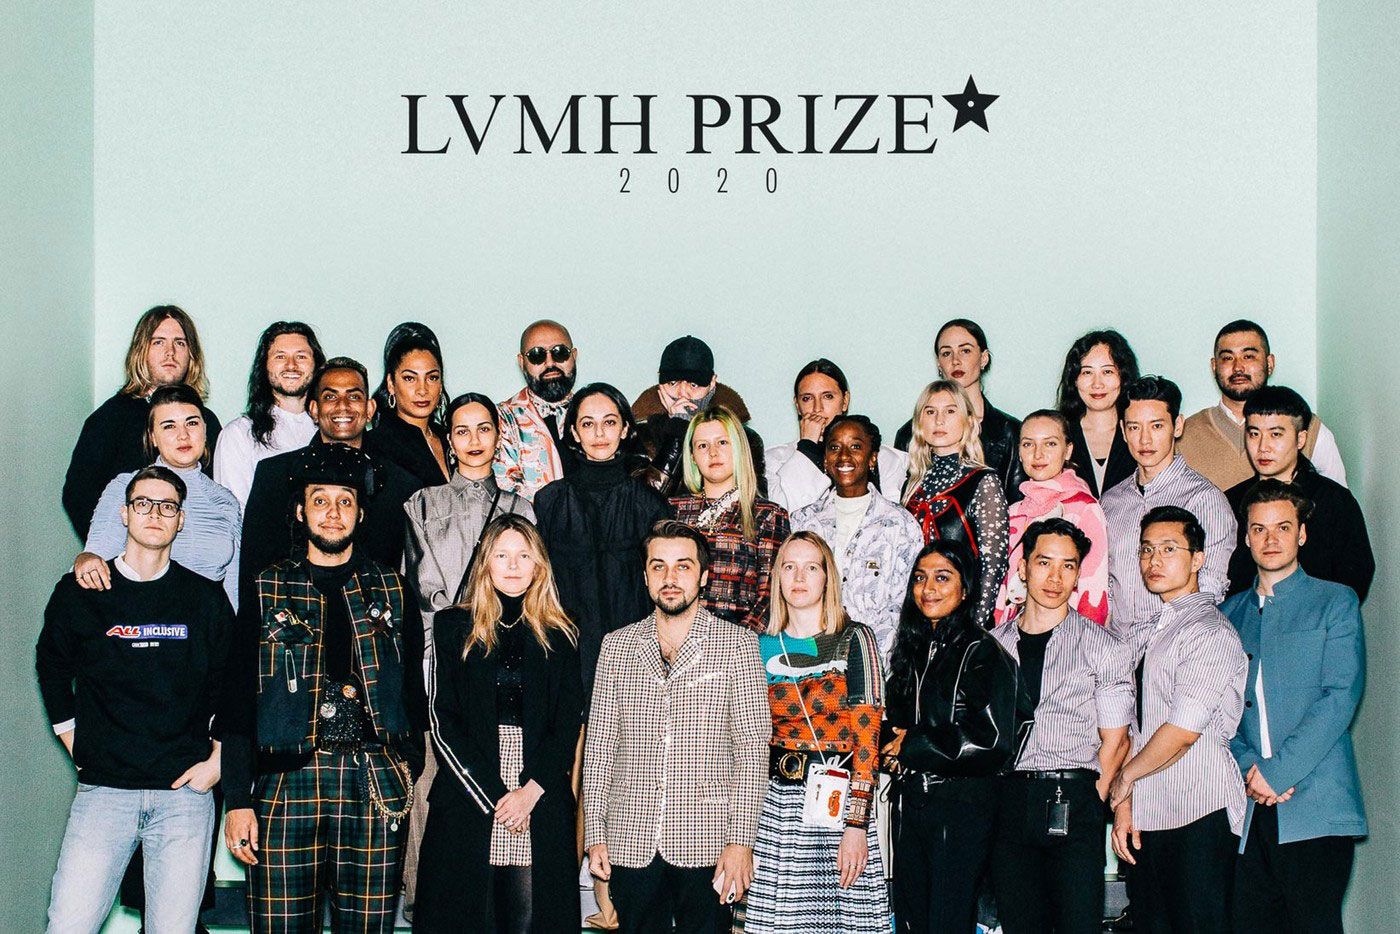 Semi-final of the 2021 LVMH Prize for young fashion designers: 8th edition  - LVMH